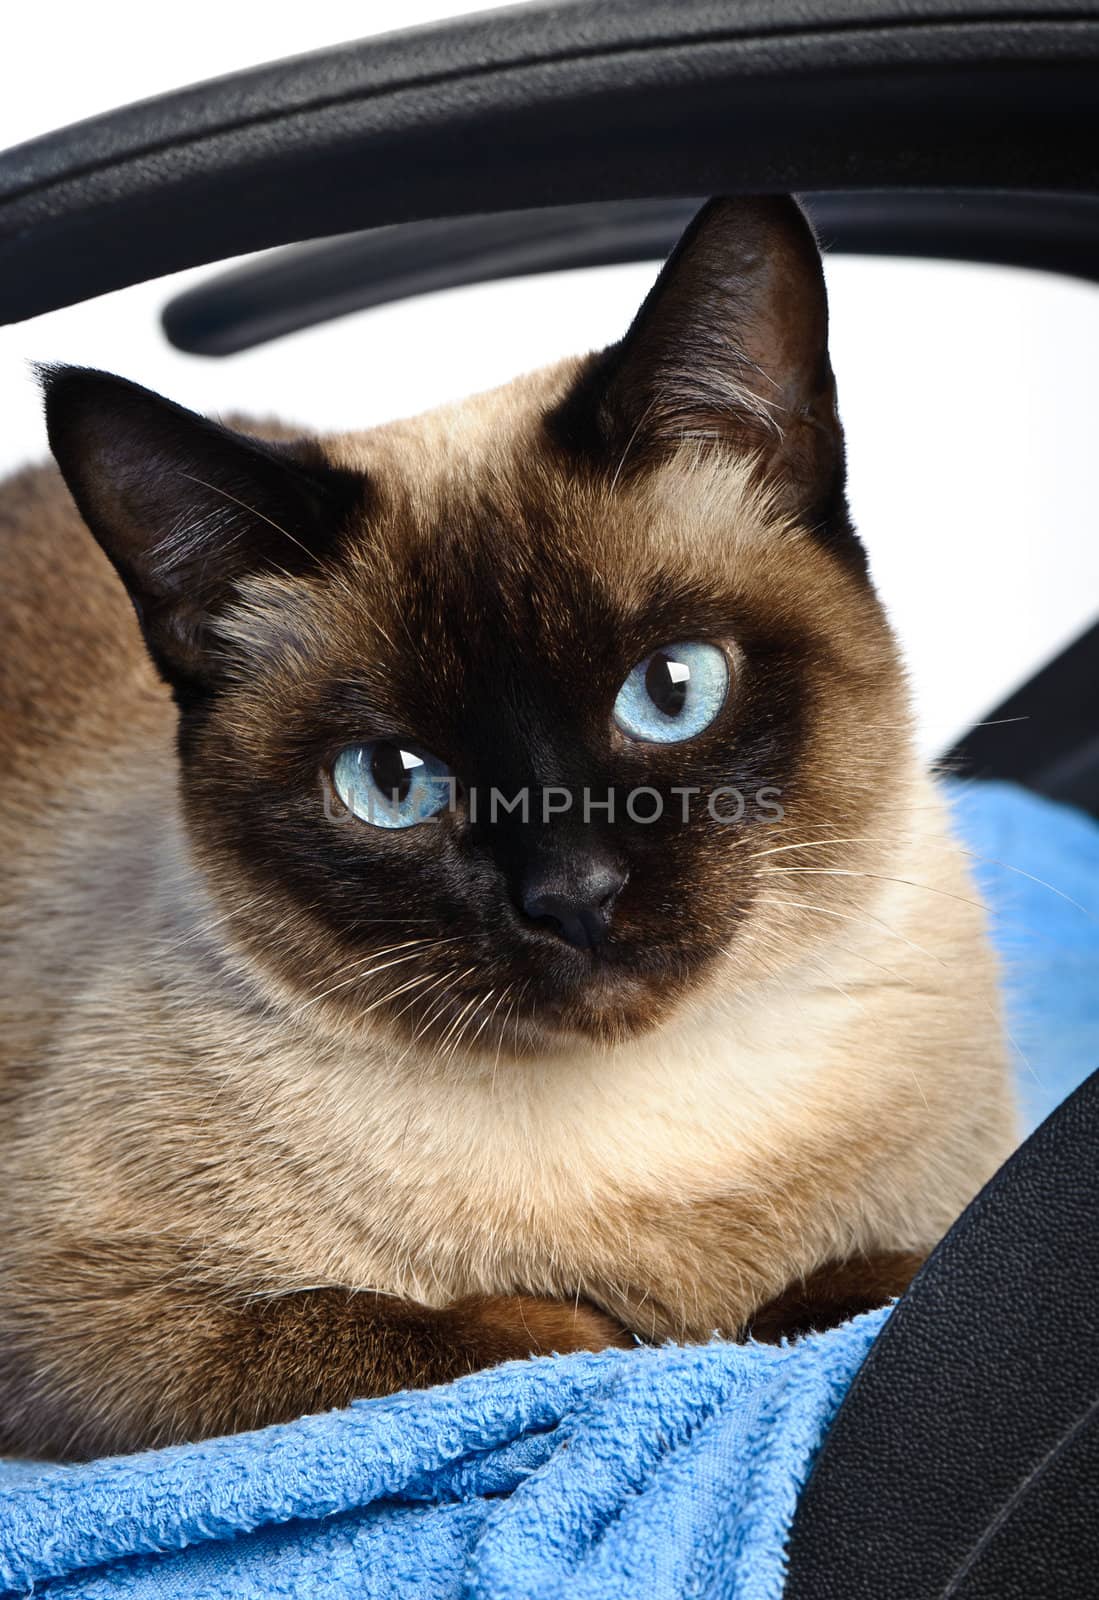 close up of cute blue-eyed siamese cat